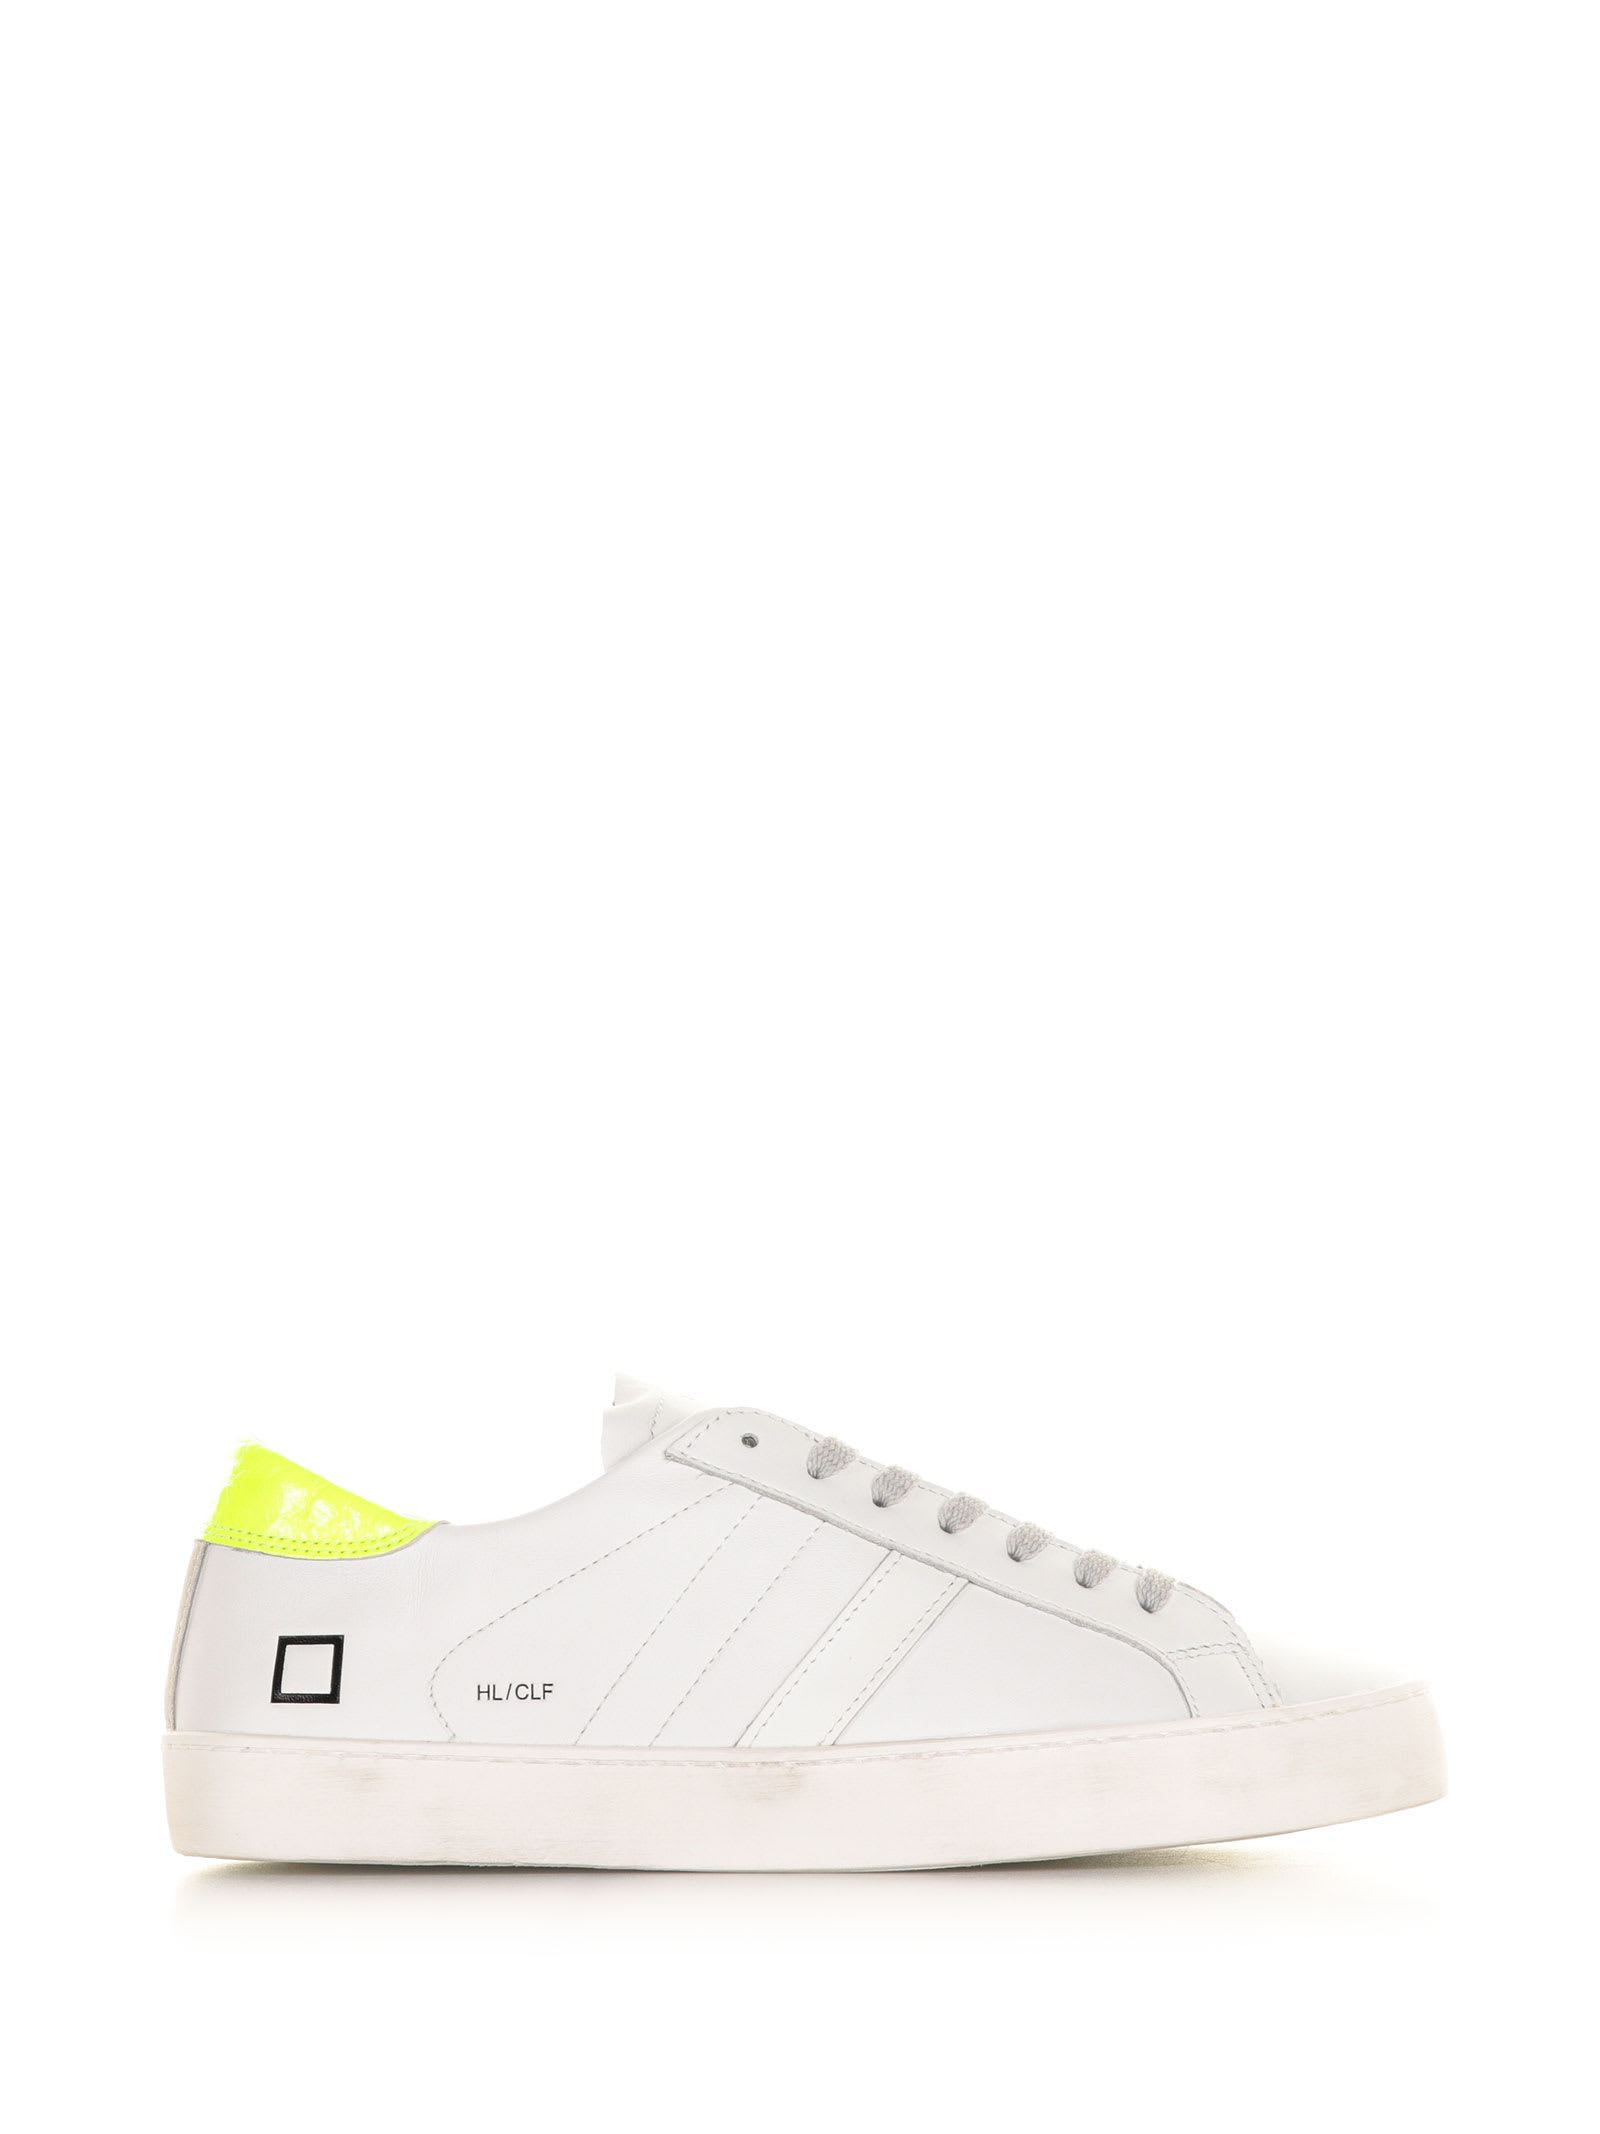 D.A.T.E. Hill Low Sneaker With Fluo Heel